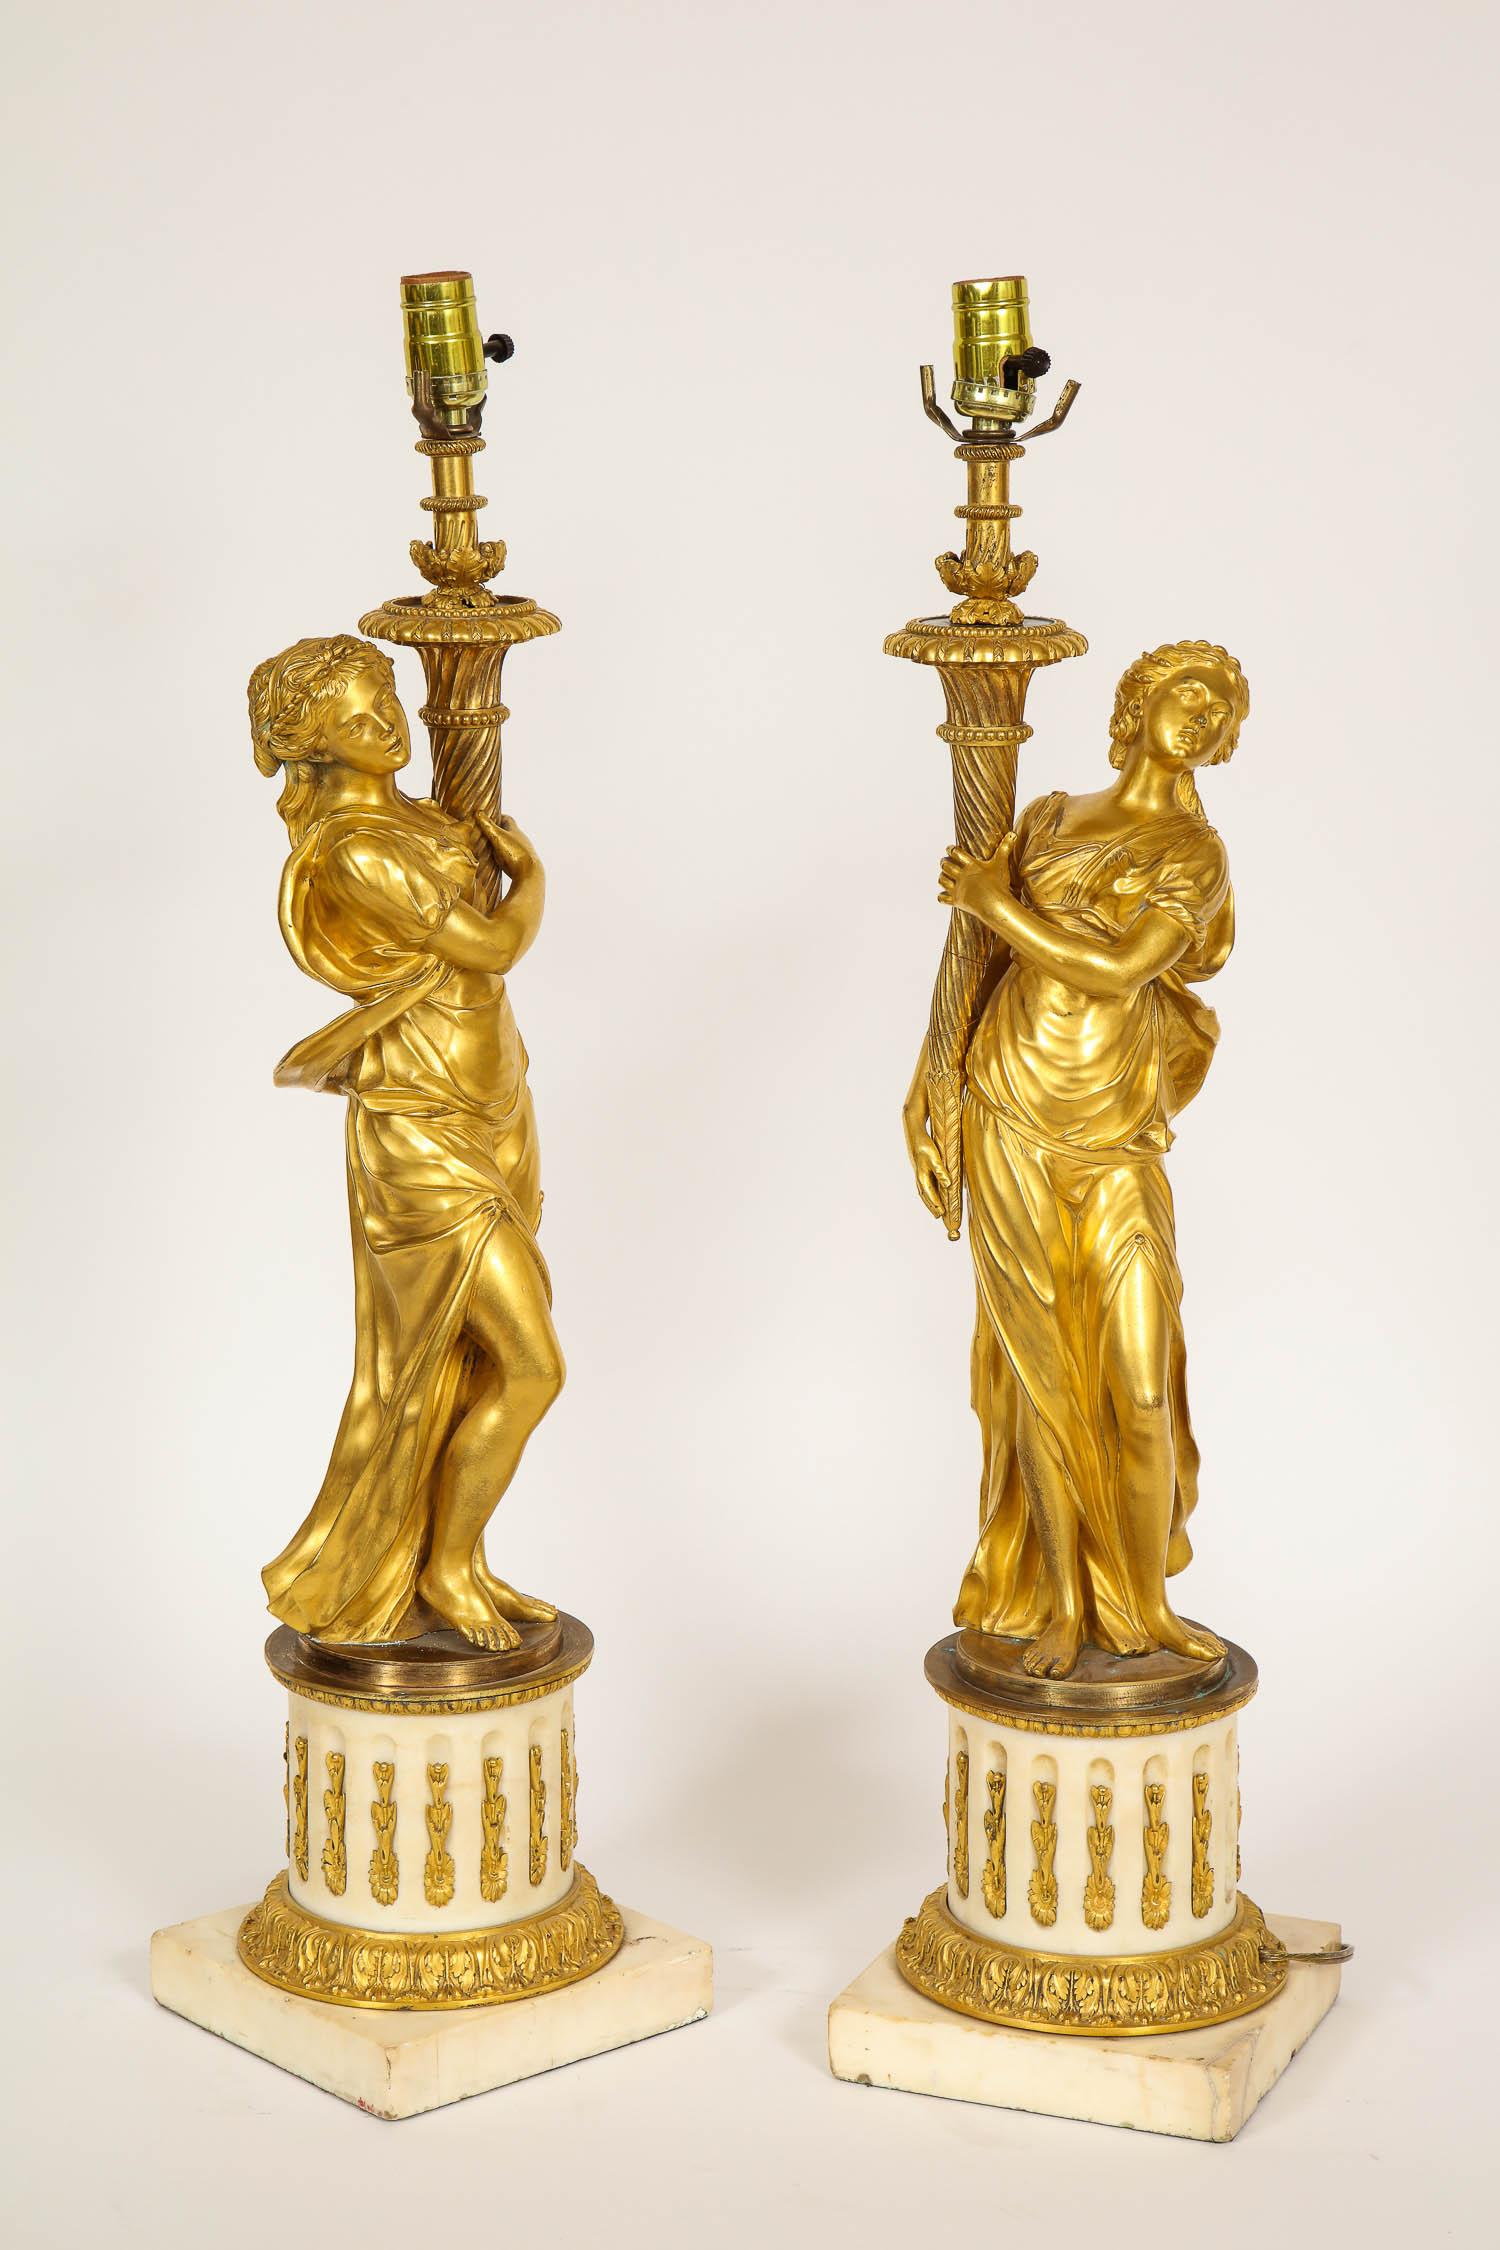 A magnificent pair of antique French Louis XVI period, 18th century gilt bronze and white Carrara marble figures of maidens mounted as Lamps. This magnificent pair of gilt bronze figures portray two beautiful maidens each holding the candle